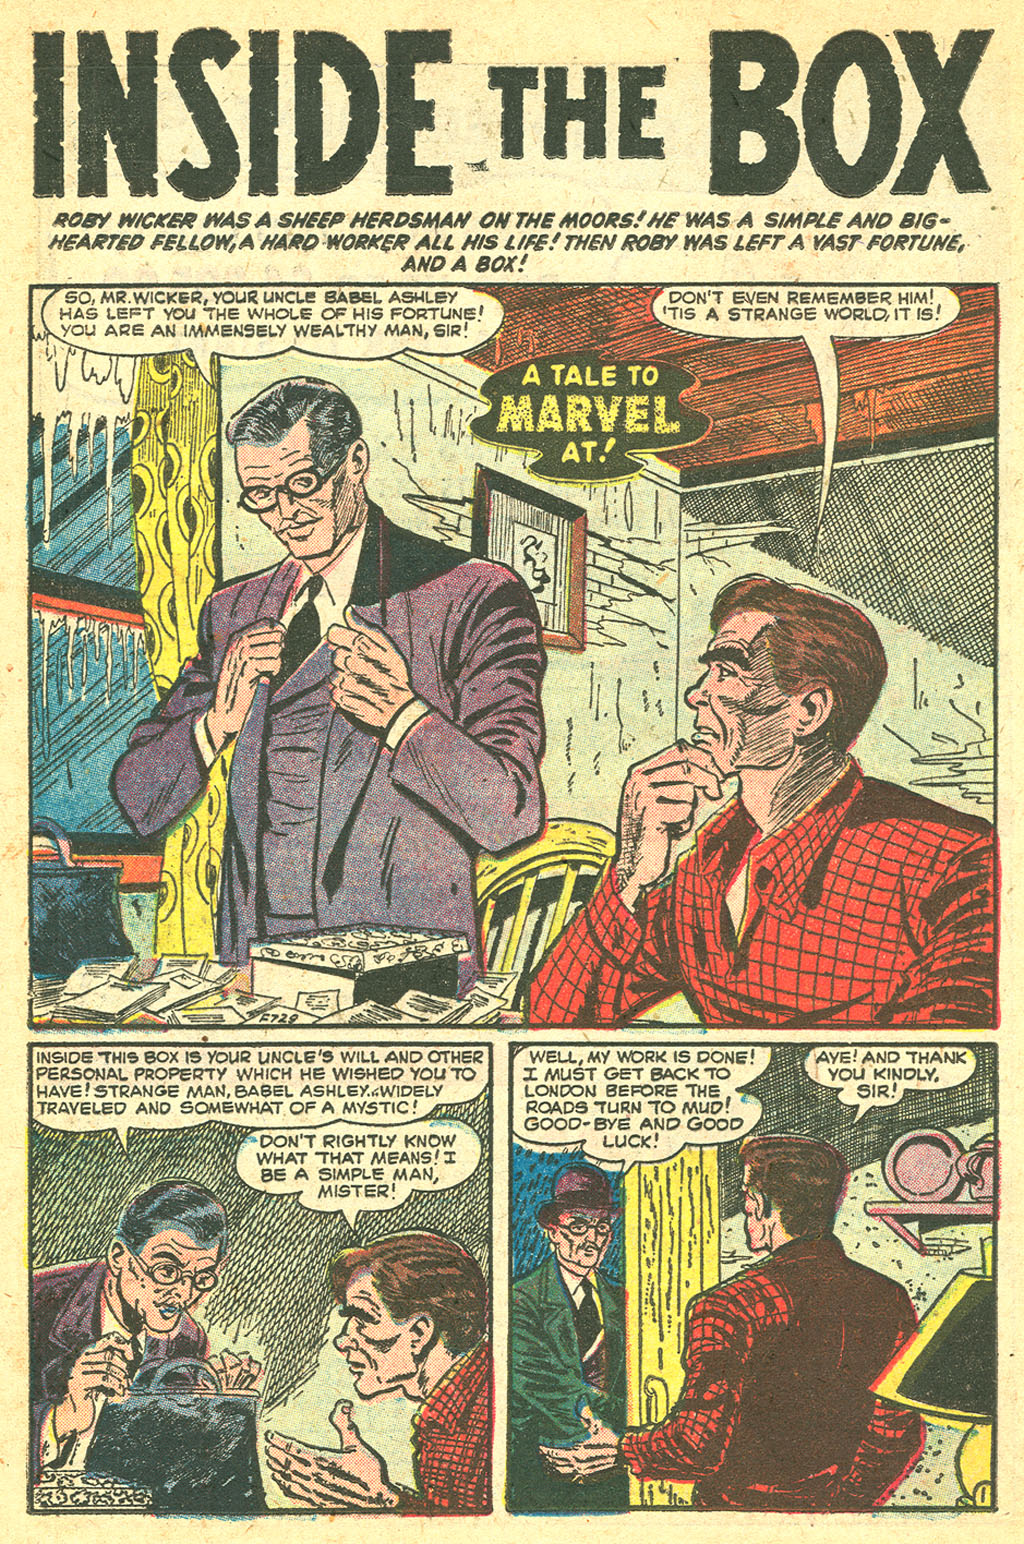 Marvel Tales (1949) 133 Page 15